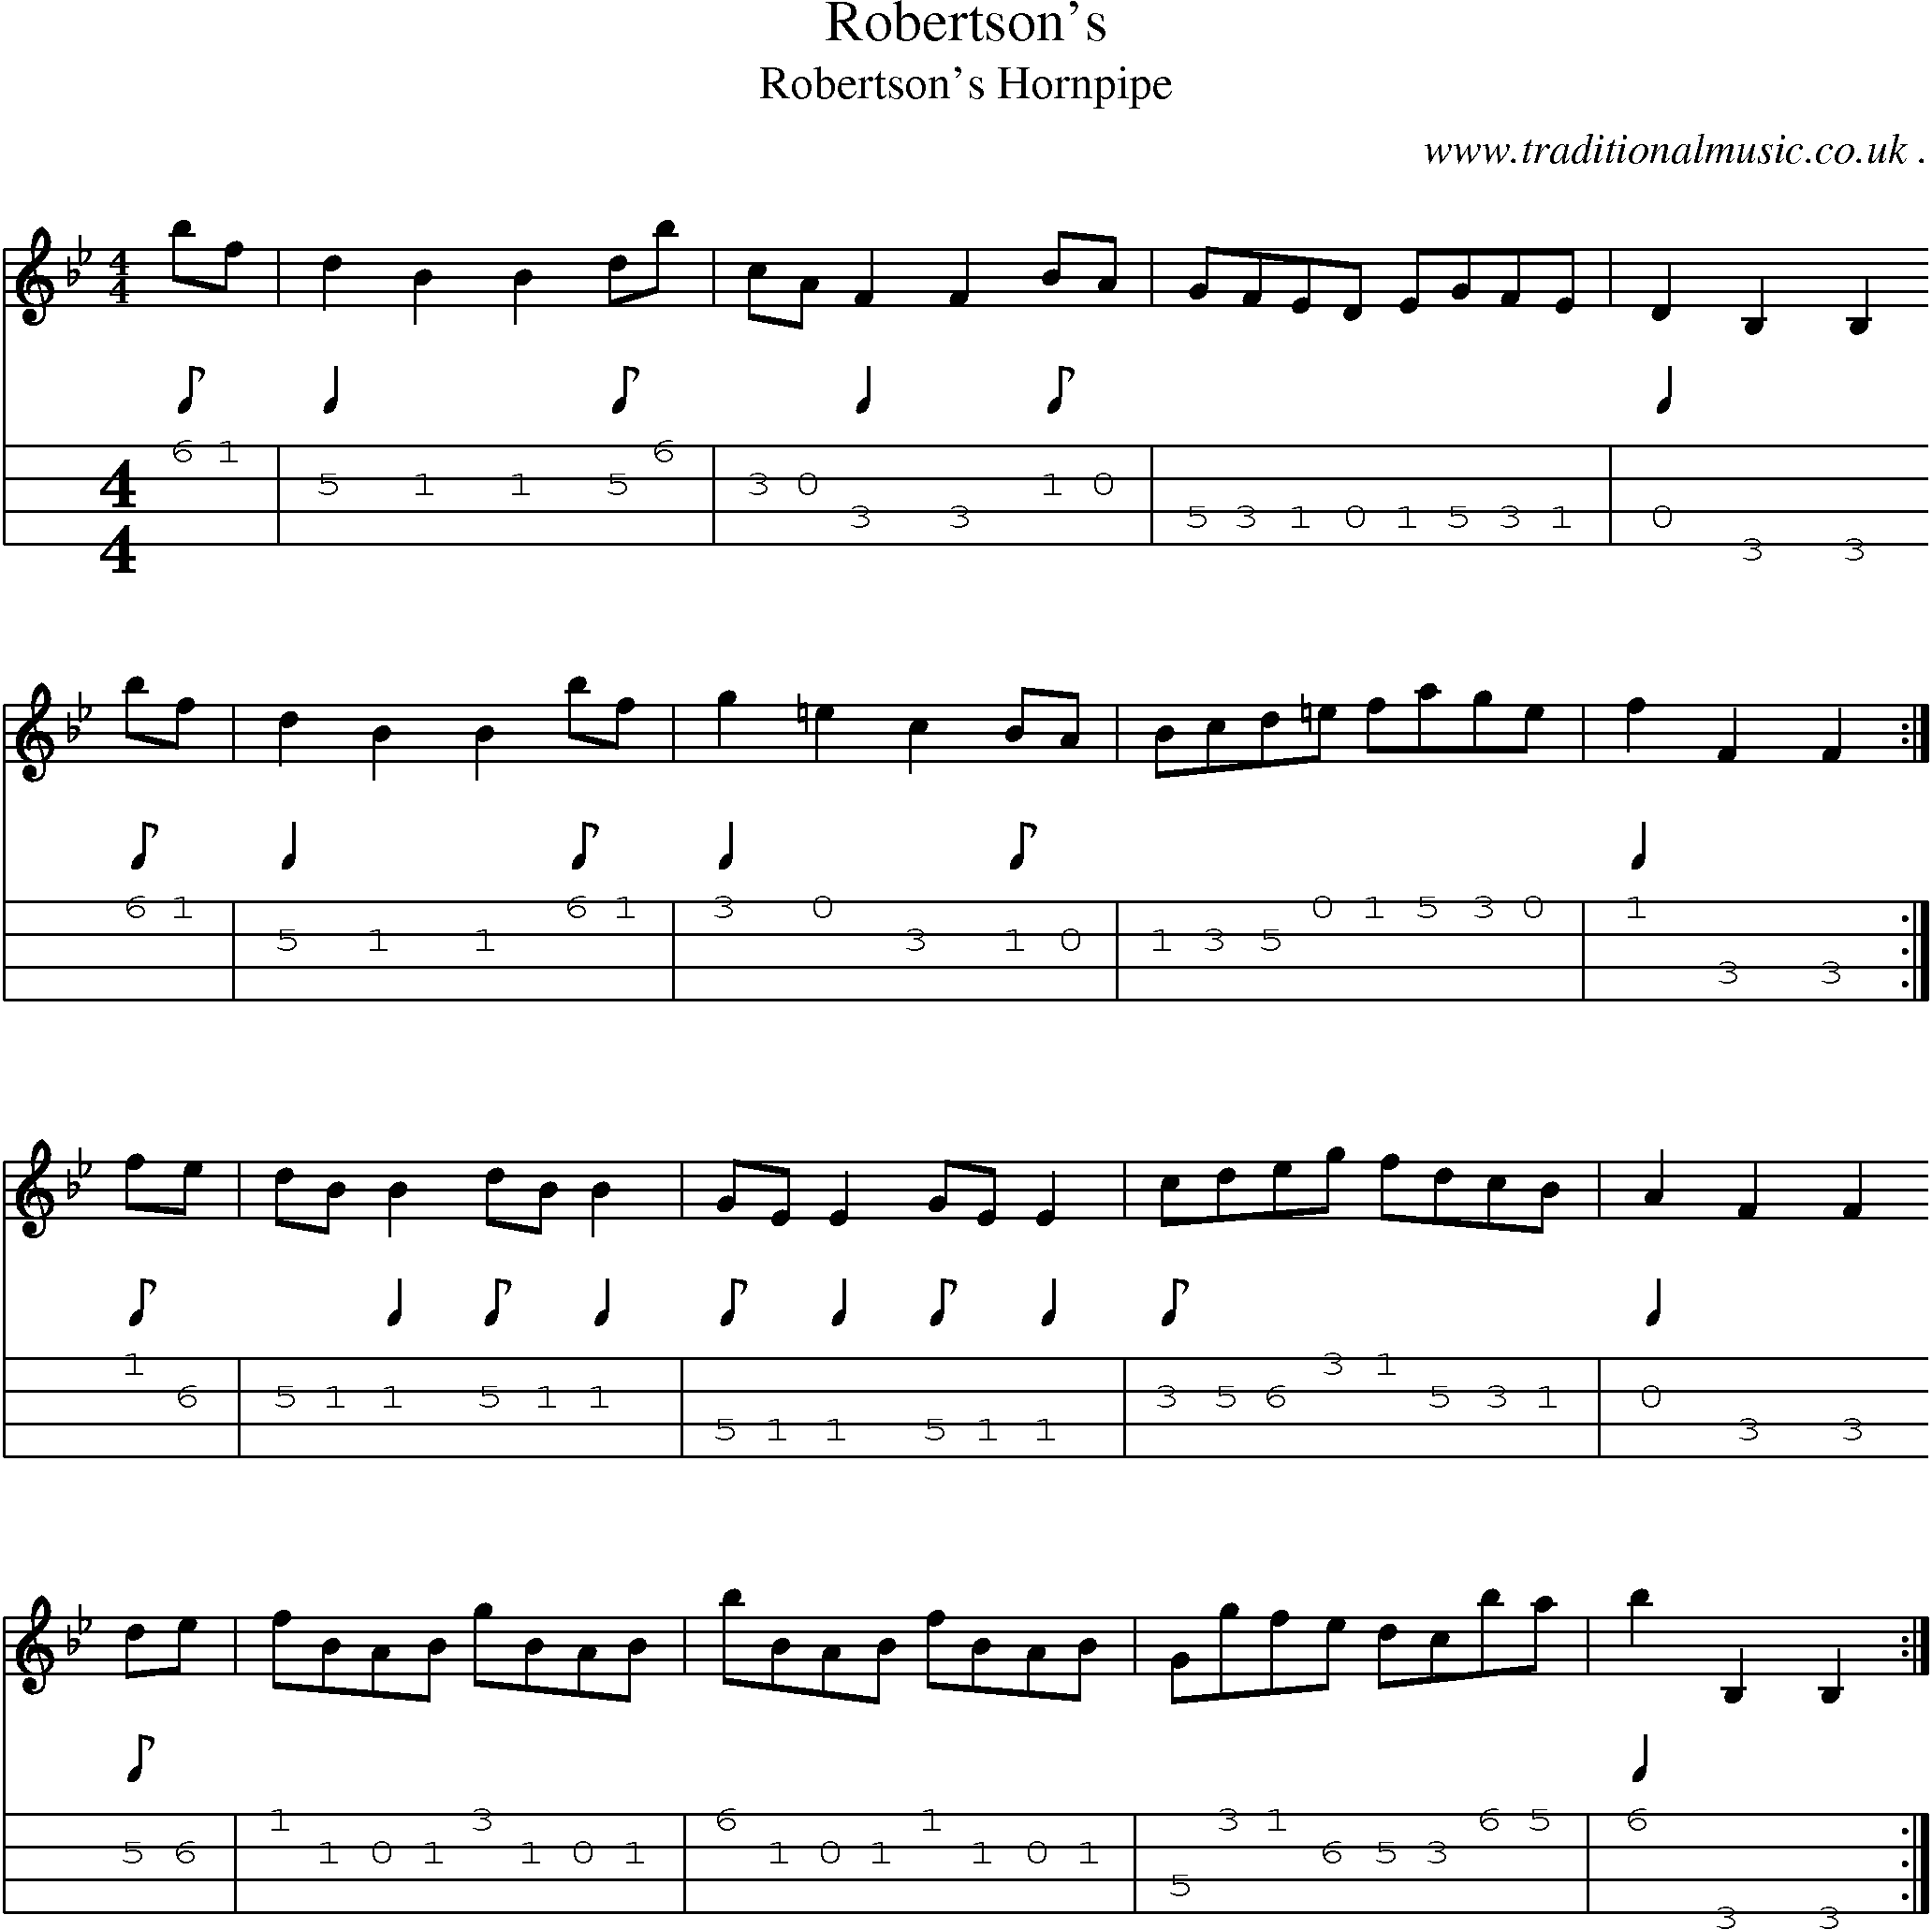 Sheet-music  score, Chords and Mandolin Tabs for Robertsons